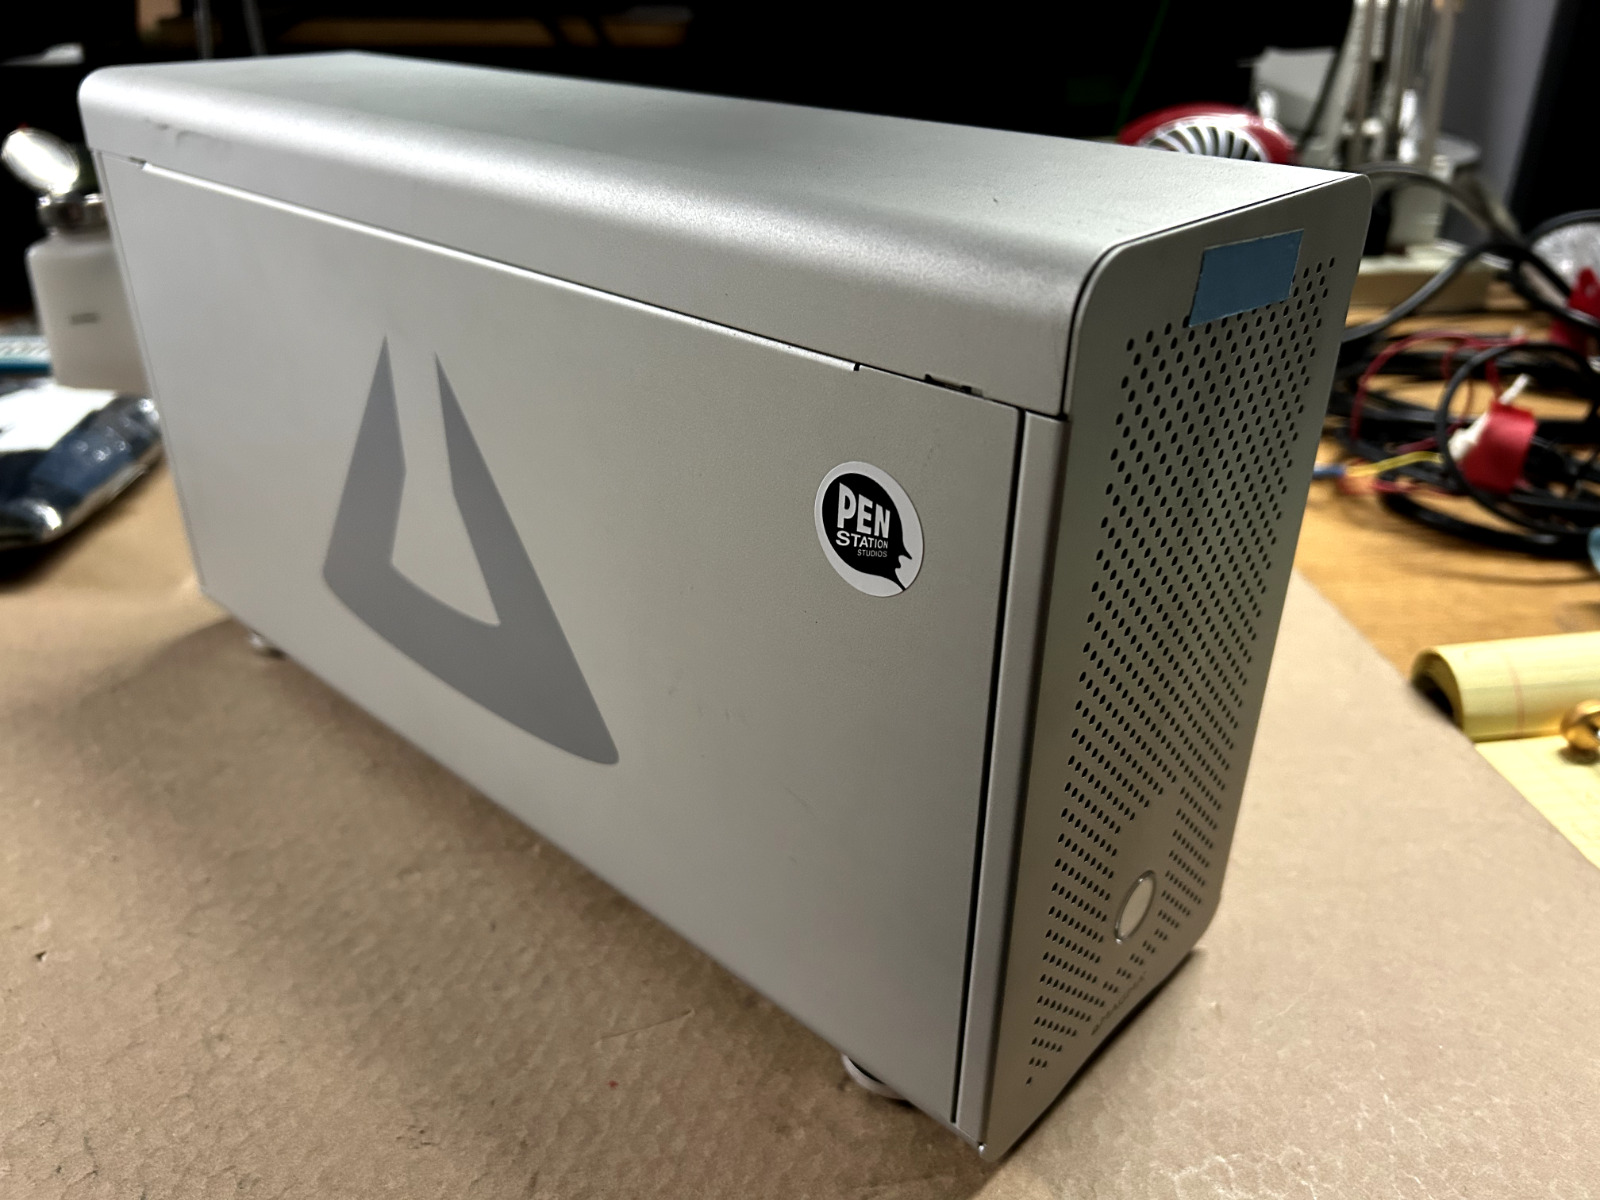 Magma ExpressBox 3T Thunderbolt 2 Expansion Chassis